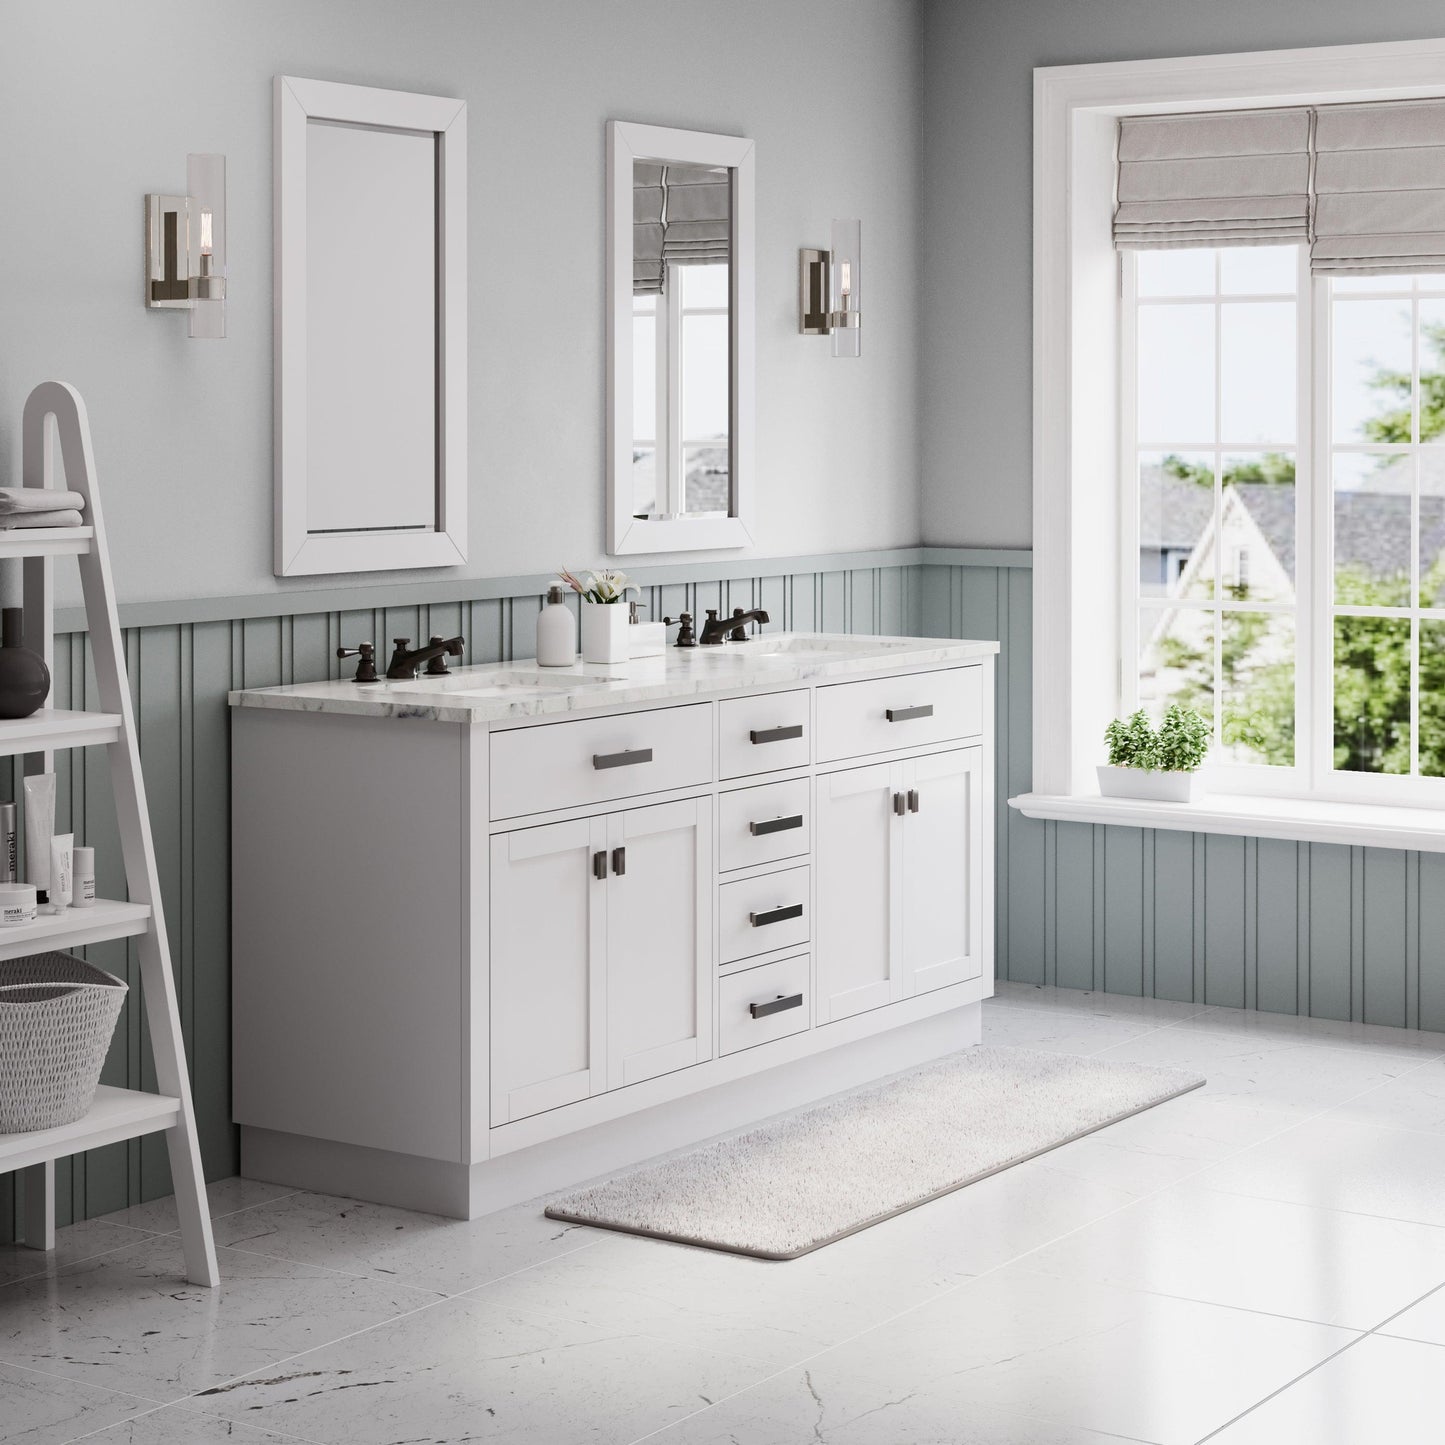 Water Creation Hartford 72" Double Sink Carrara White Marble Countertop Bath Vanity in Pure White